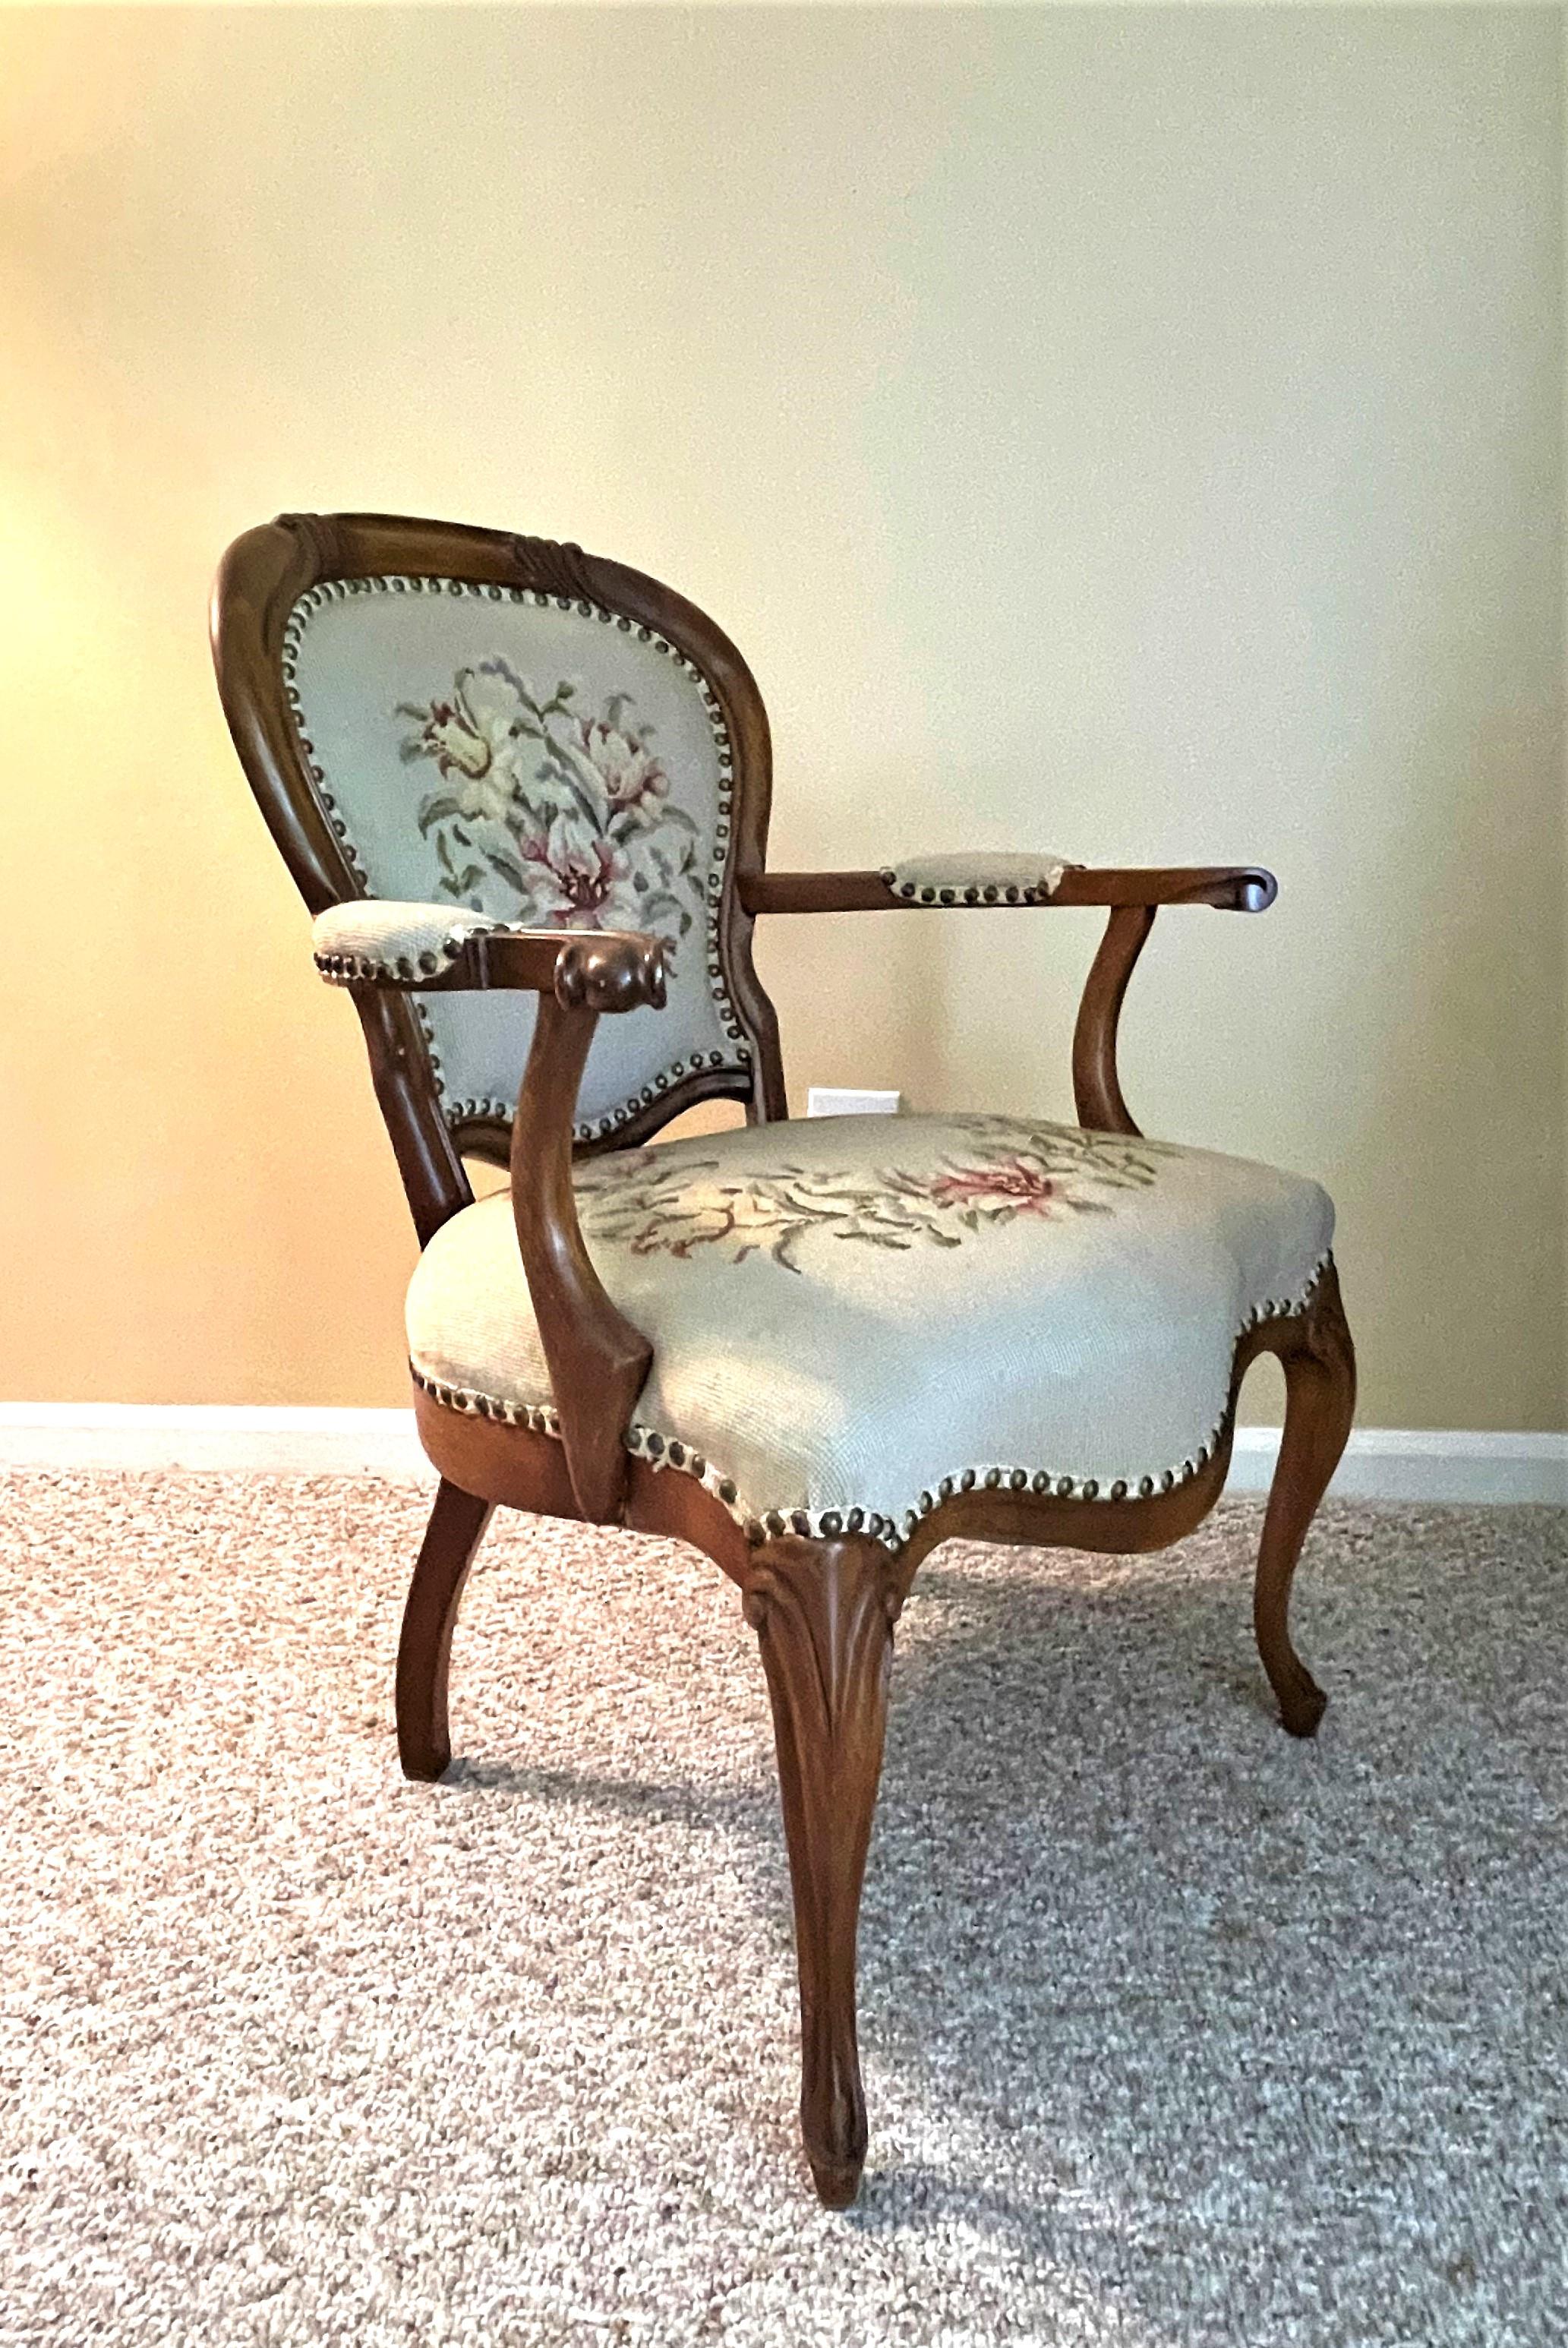 20th Century 1920s French Walnut Accent Chair with Needlepoint Upholstery For Sale